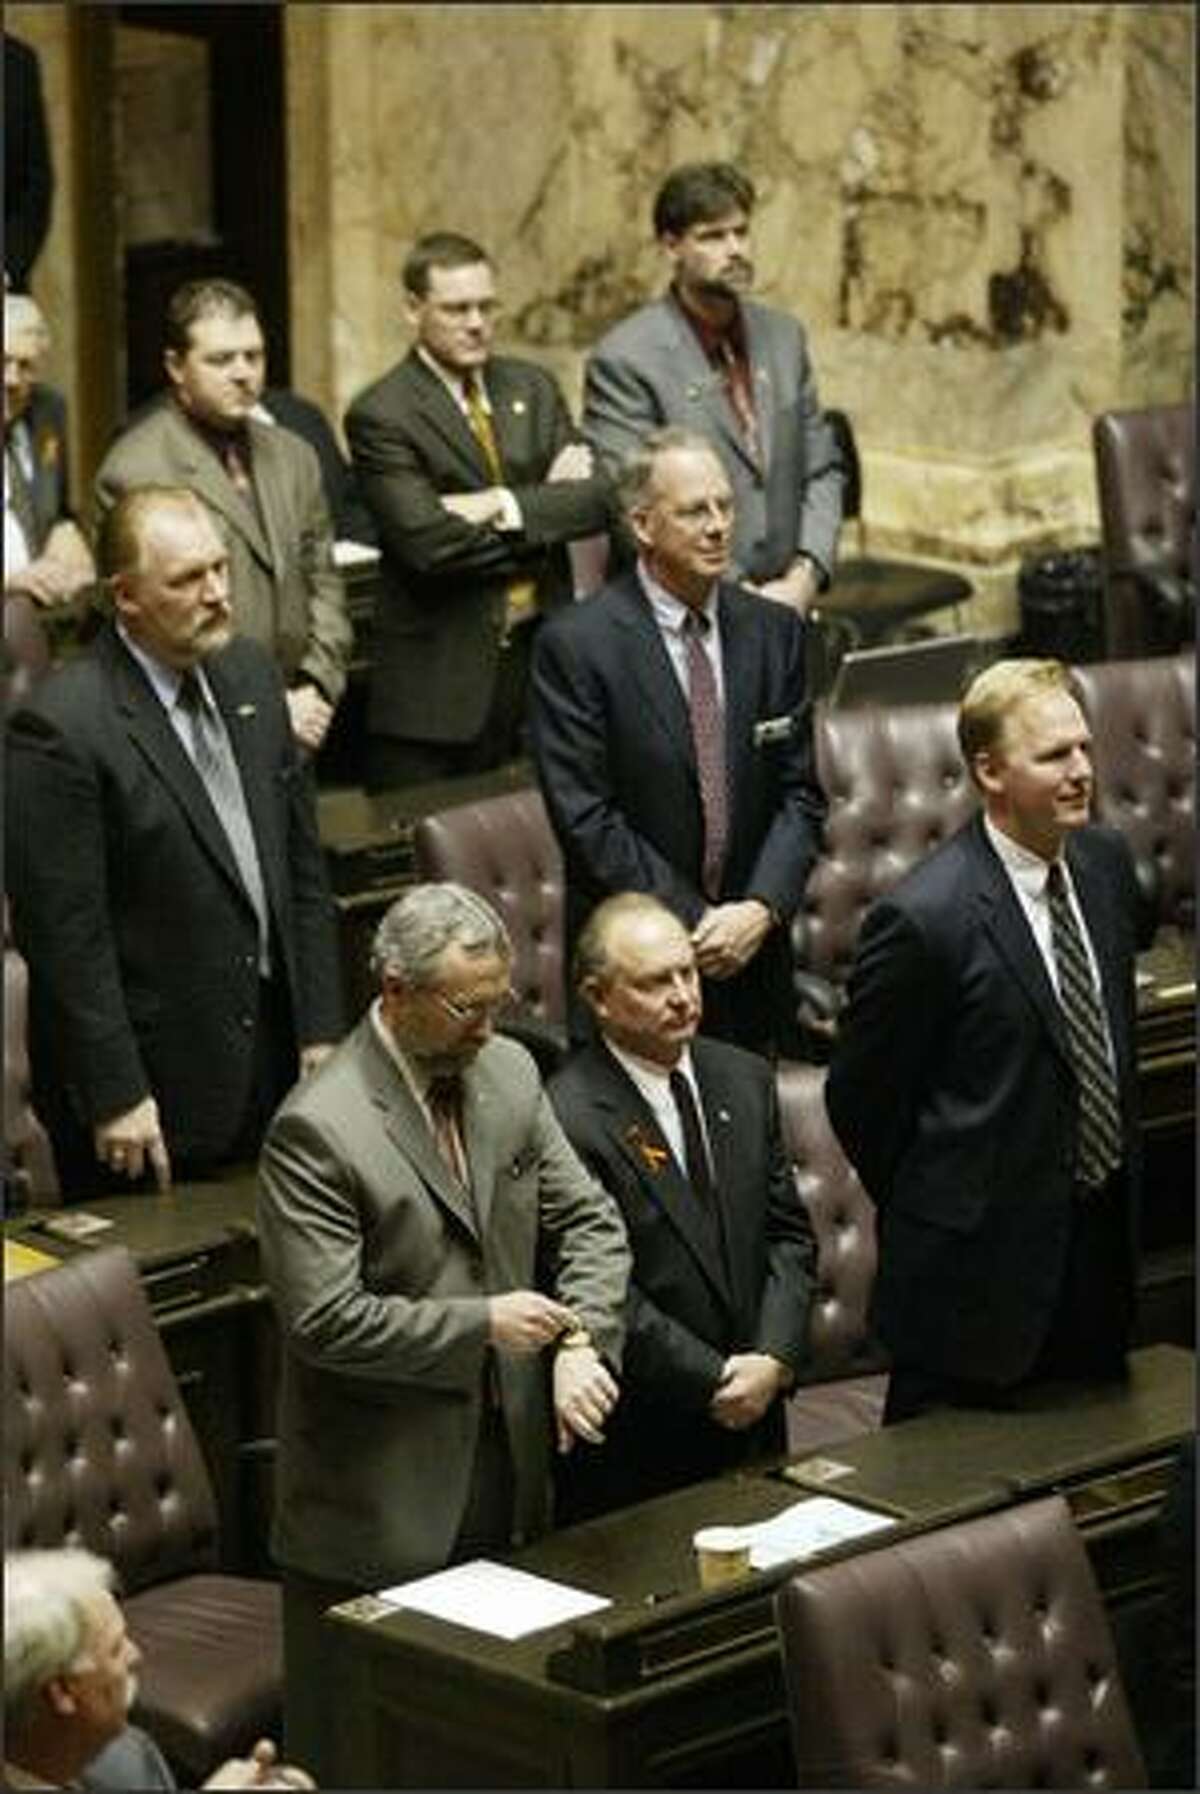 Republican members of the House and Senate, one looking at his watch, refused to applaud Christine Gregoire after she was sworn in as governor.